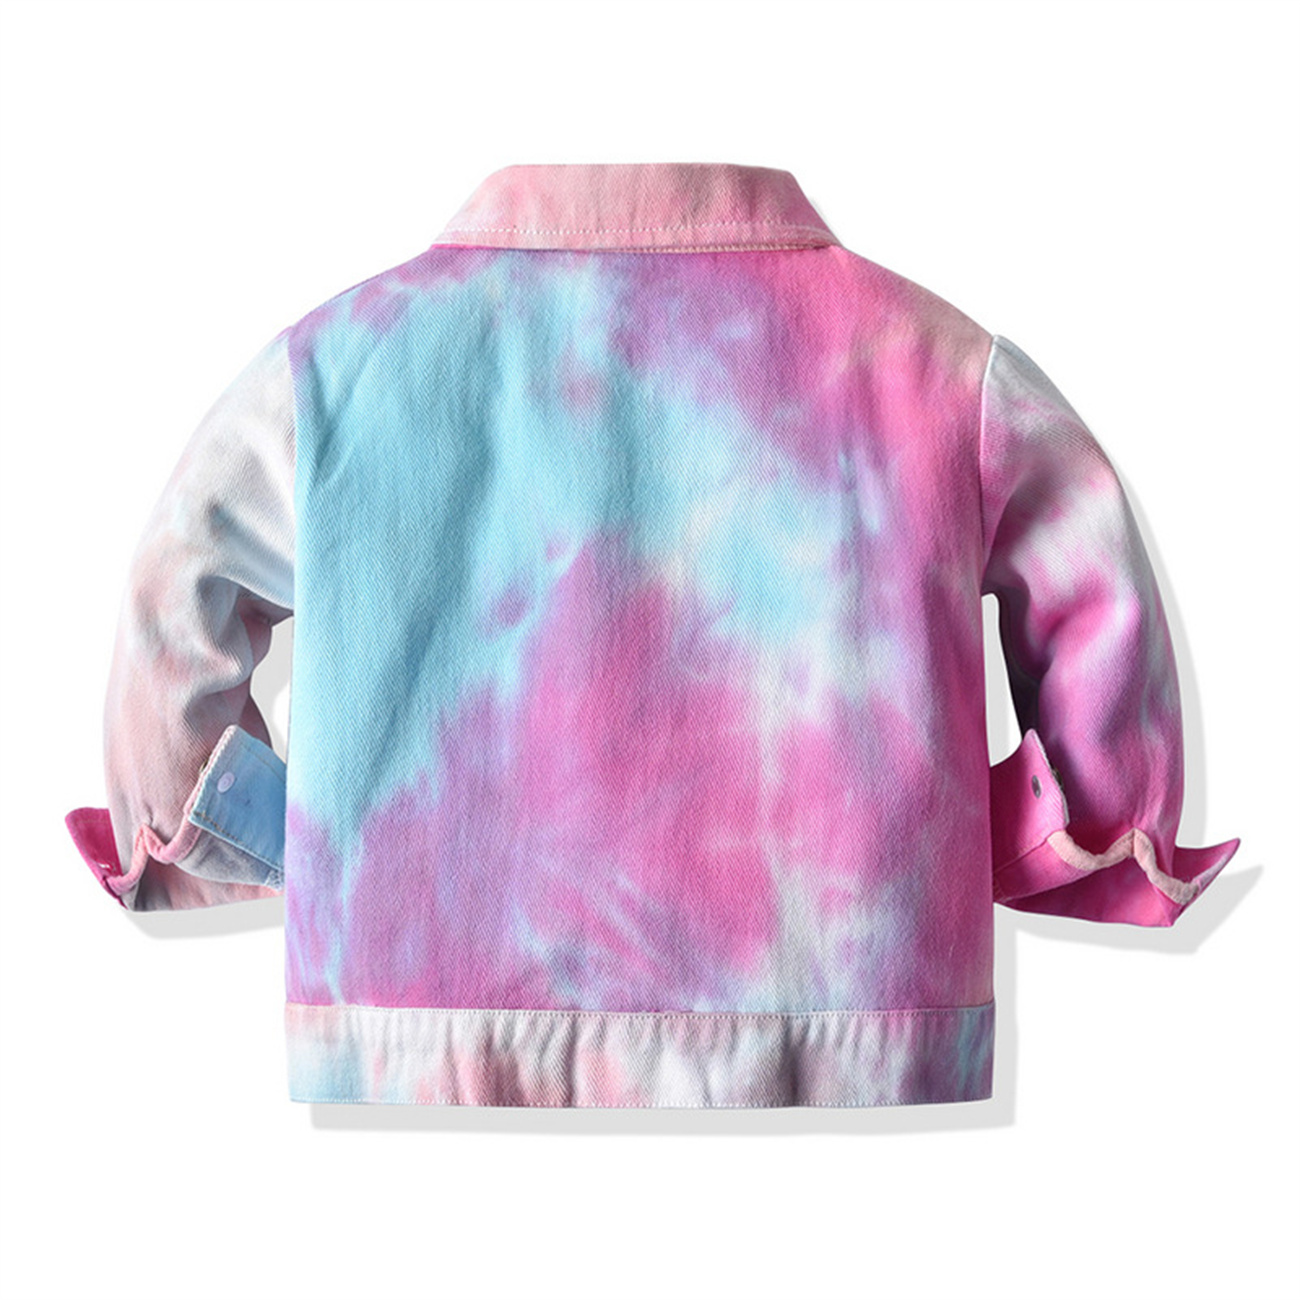 Toddler Tie-dye Denim Jean Jacket for Girls Boys Size 1-7T Single-breasted Mid-length Jacket for Spring Fall,Pink,5-6 Years - image 2 of 7